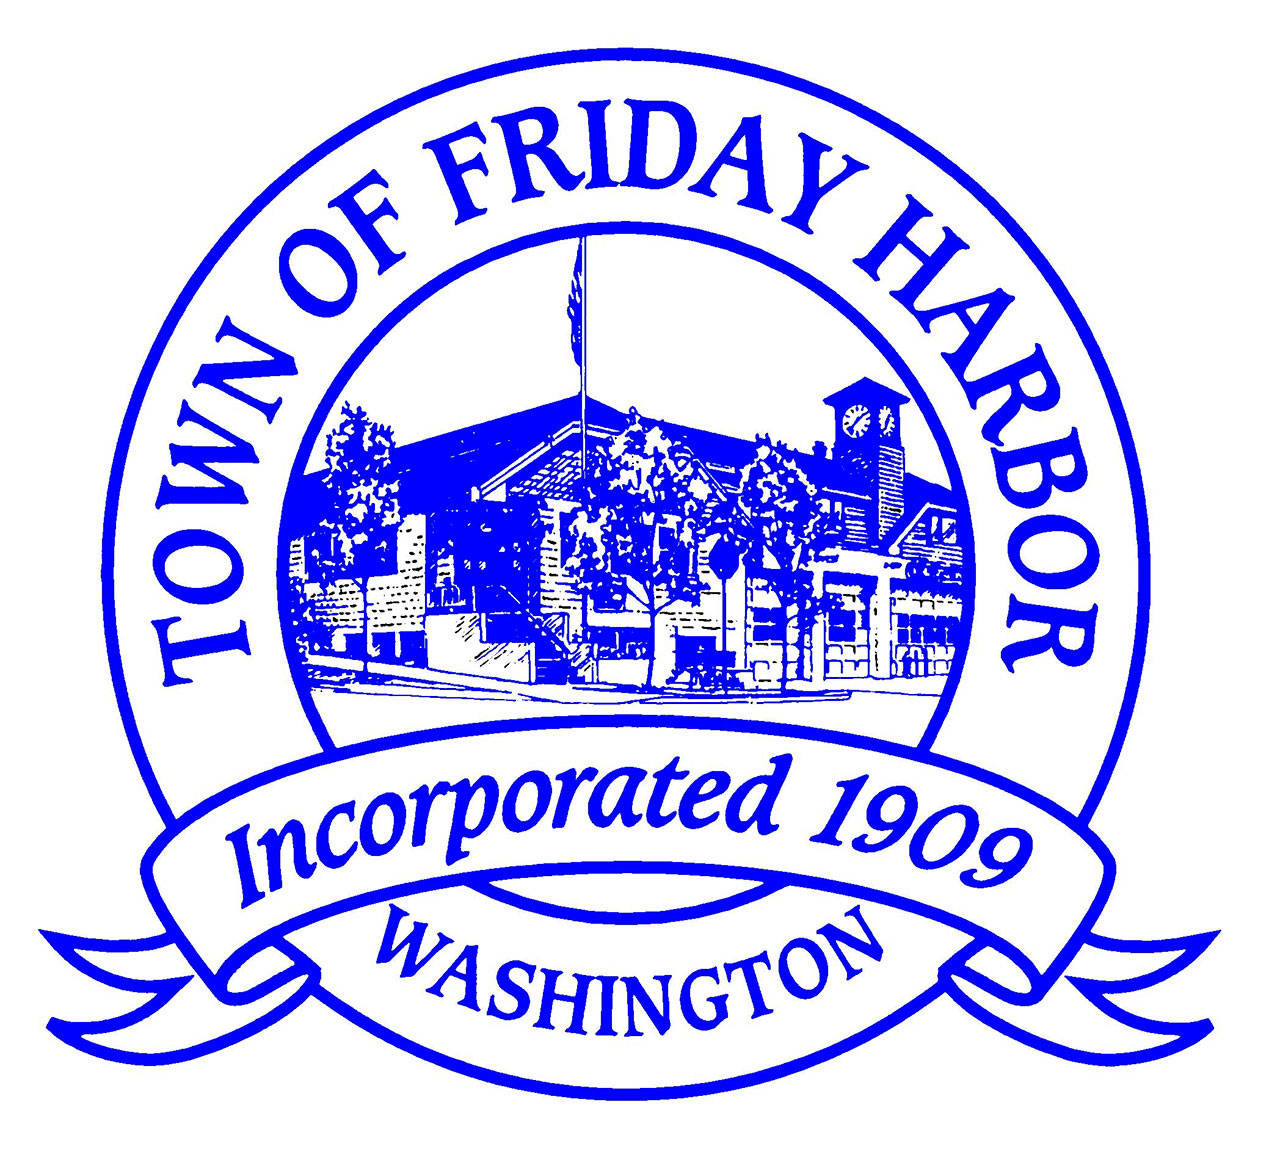 Fourth of July Parade street closures and detours in Friday Harbor